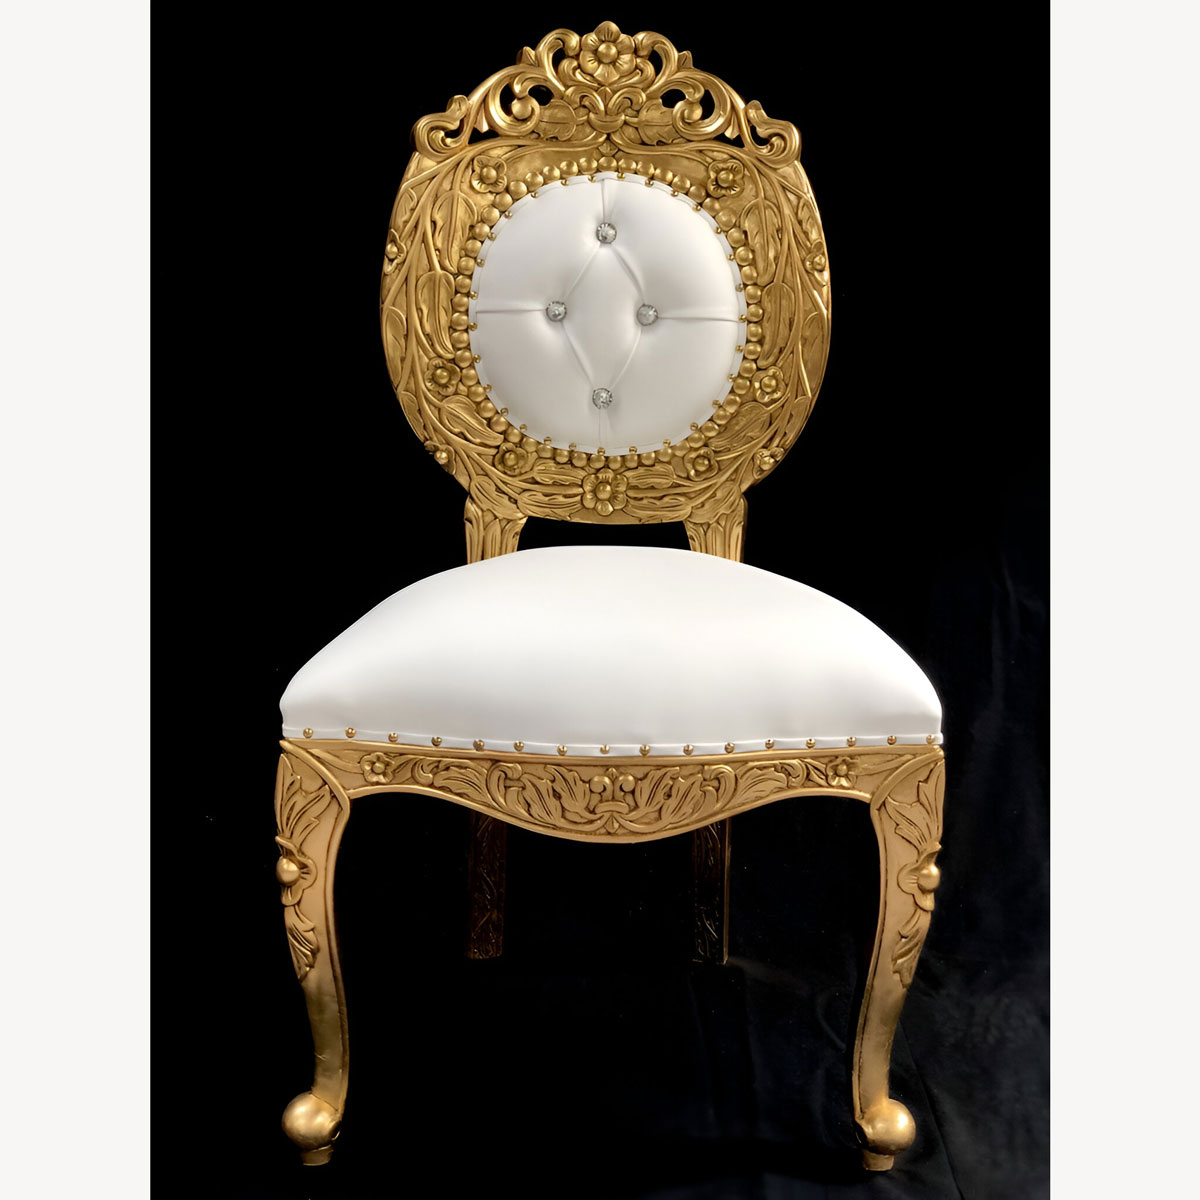 Avalon Ornate Gold Leaf Chair Upholstered In Bright White Easiclean Faux Leather With Crystal Buttons 1 - Hampshire Barn Interiors - Avalon Ornate Gold Leaf Chair Upholstered In Bright White Easiclean Faux Leather With Crystal Buttons -